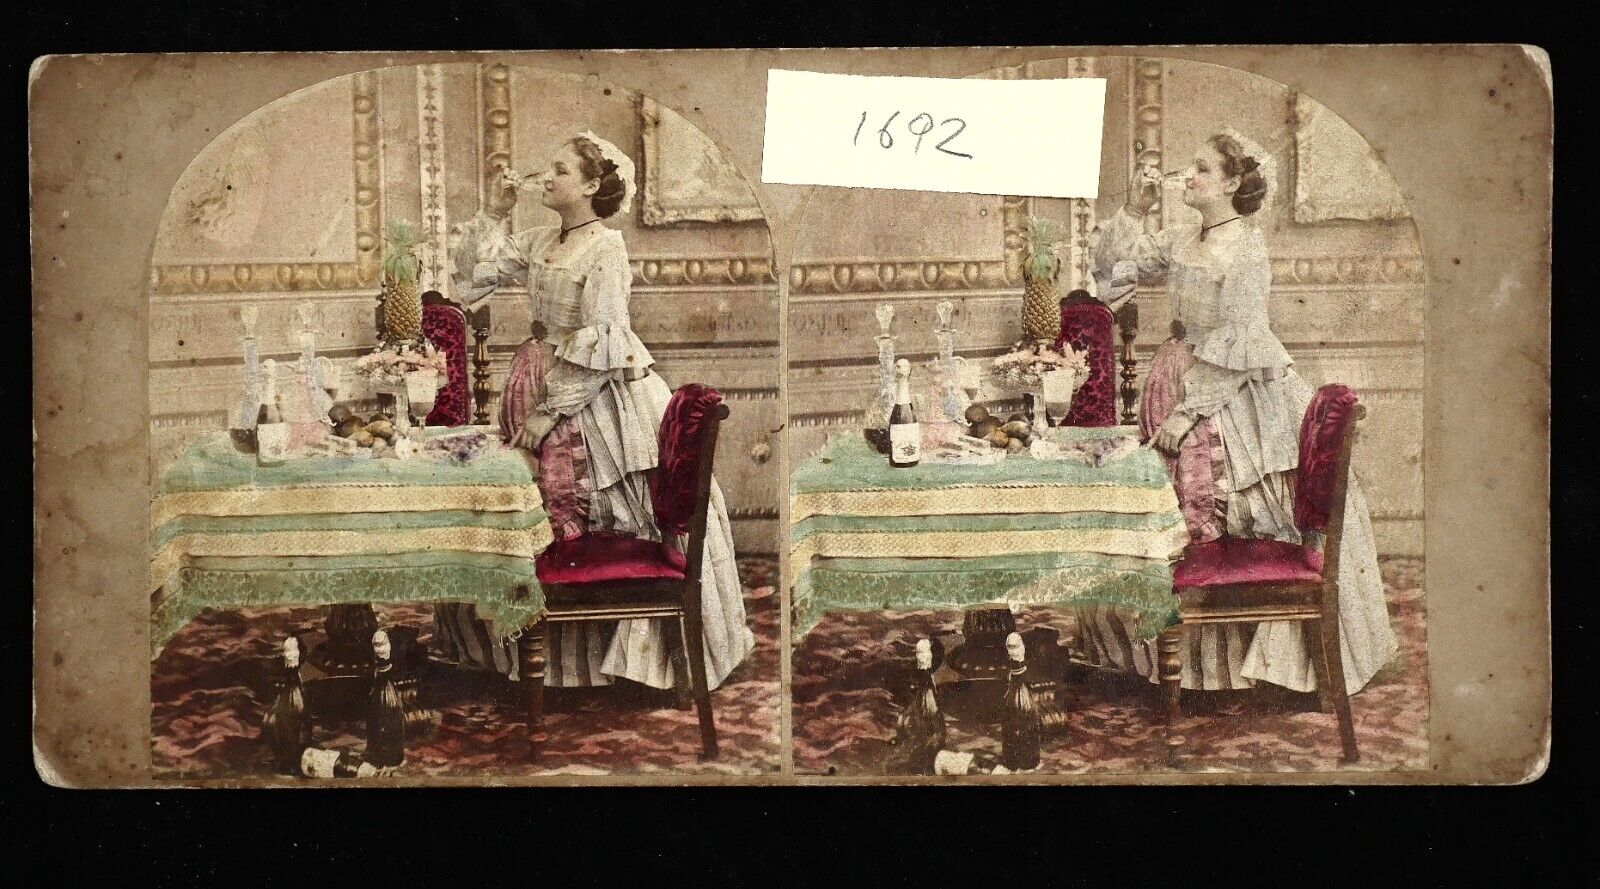 EARLY 1850s hand colored Stereoview - Tasting on the Sly - flat mount